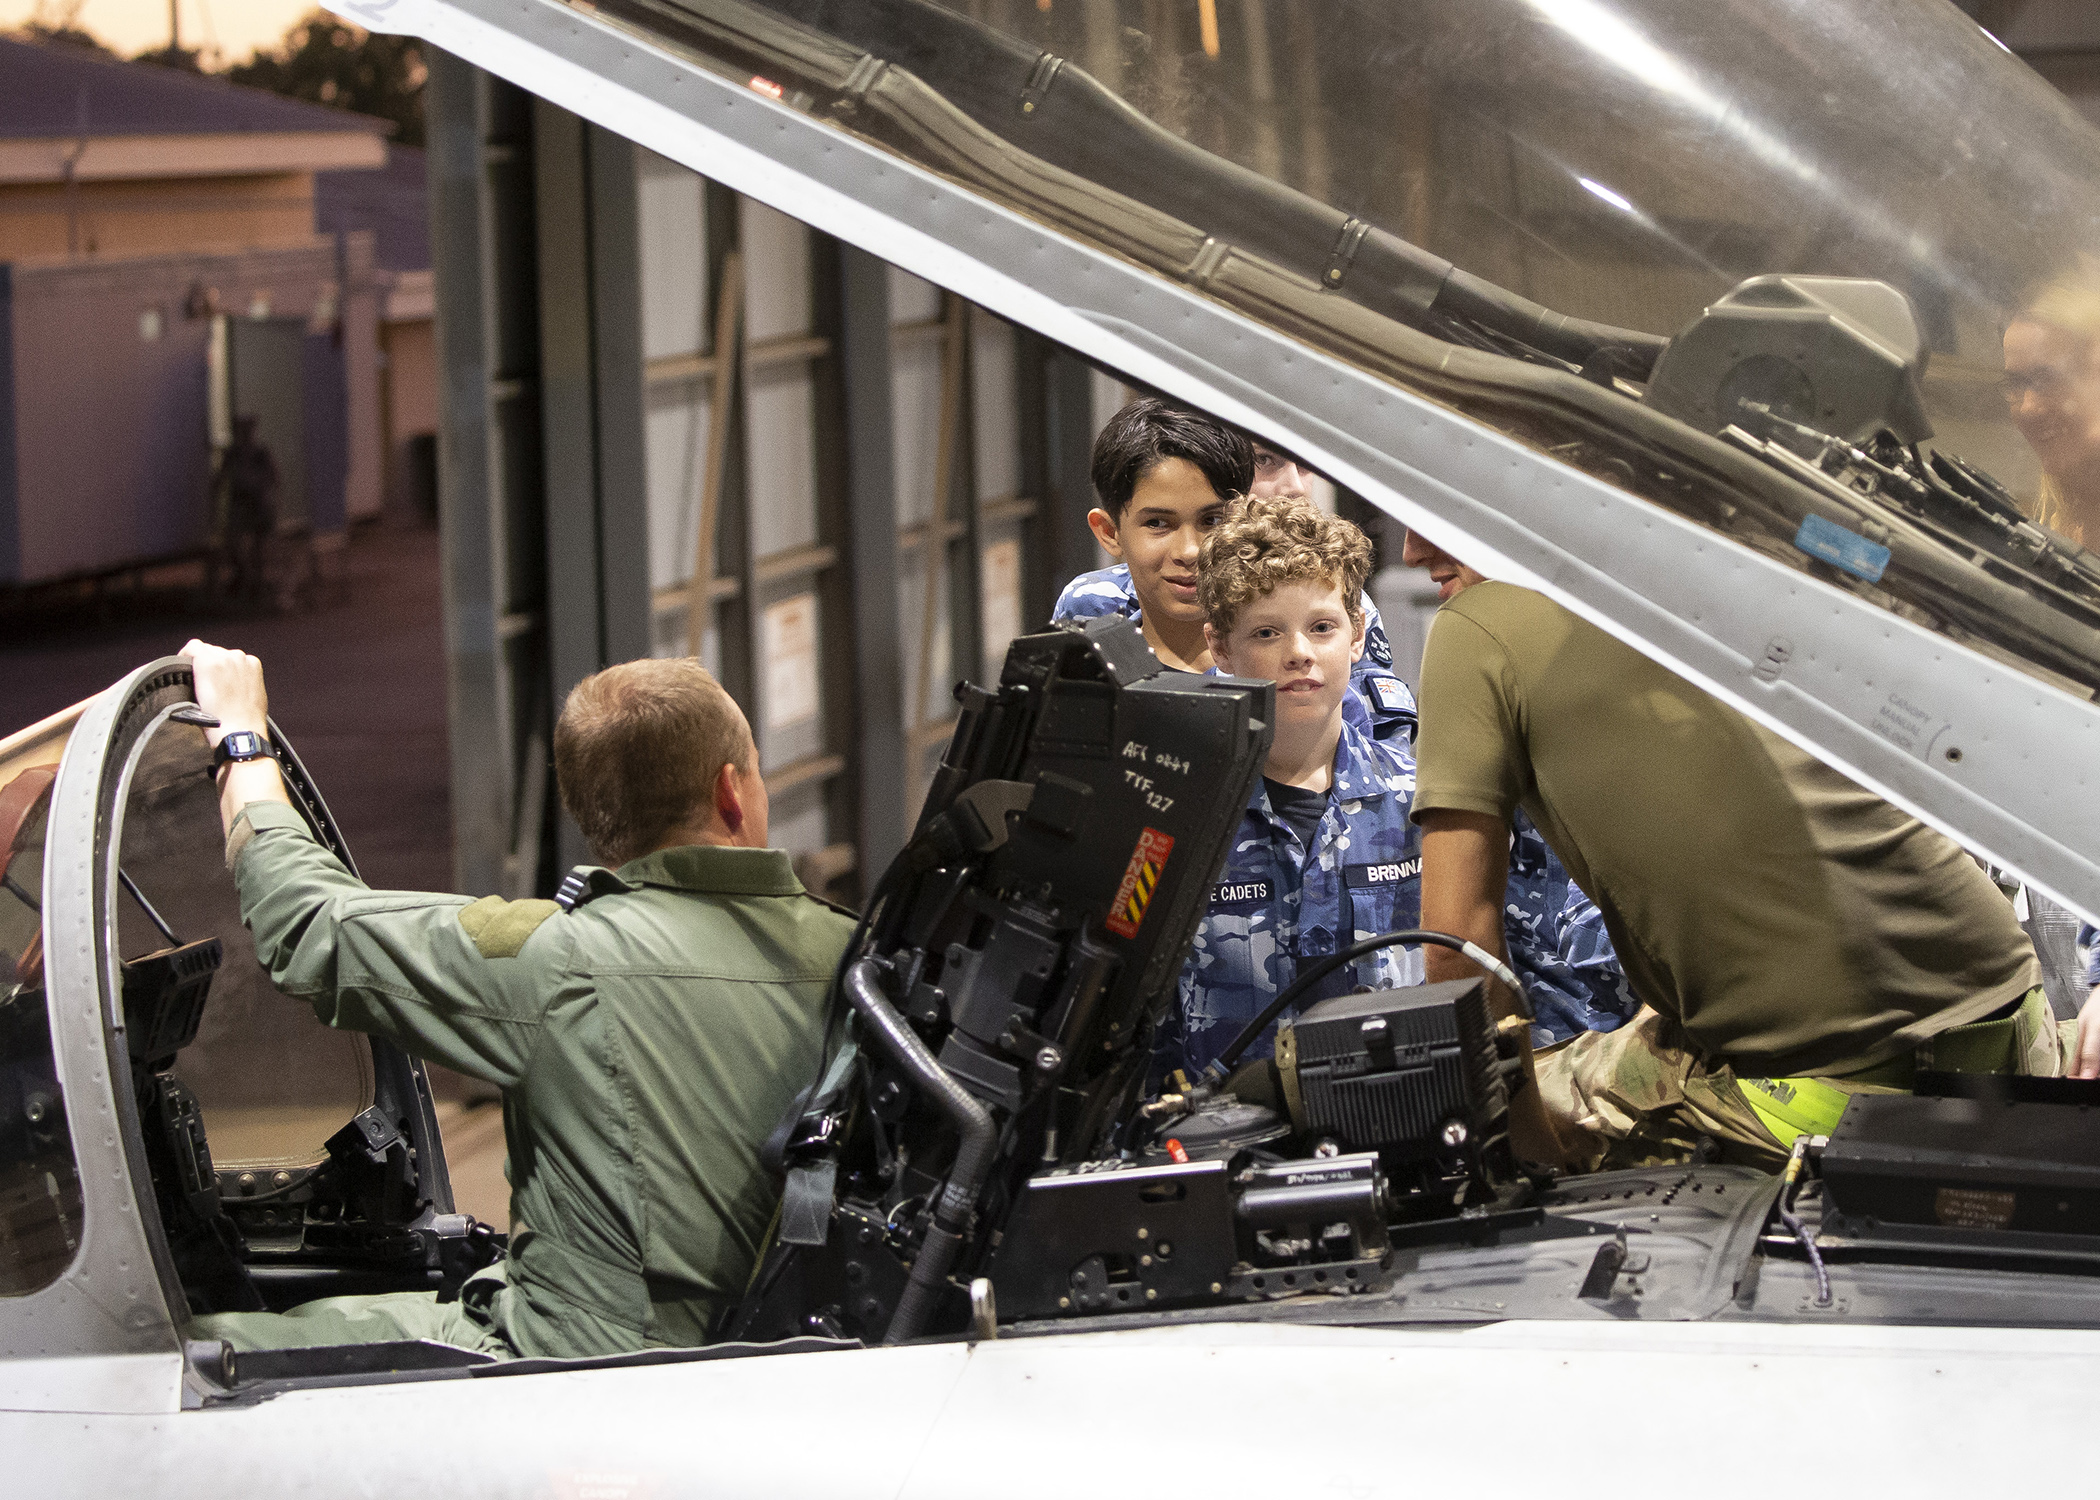 Image shows young Royal Australian Air Force Cadets with RAF aviator in Typhoon cockpit in the hangar.